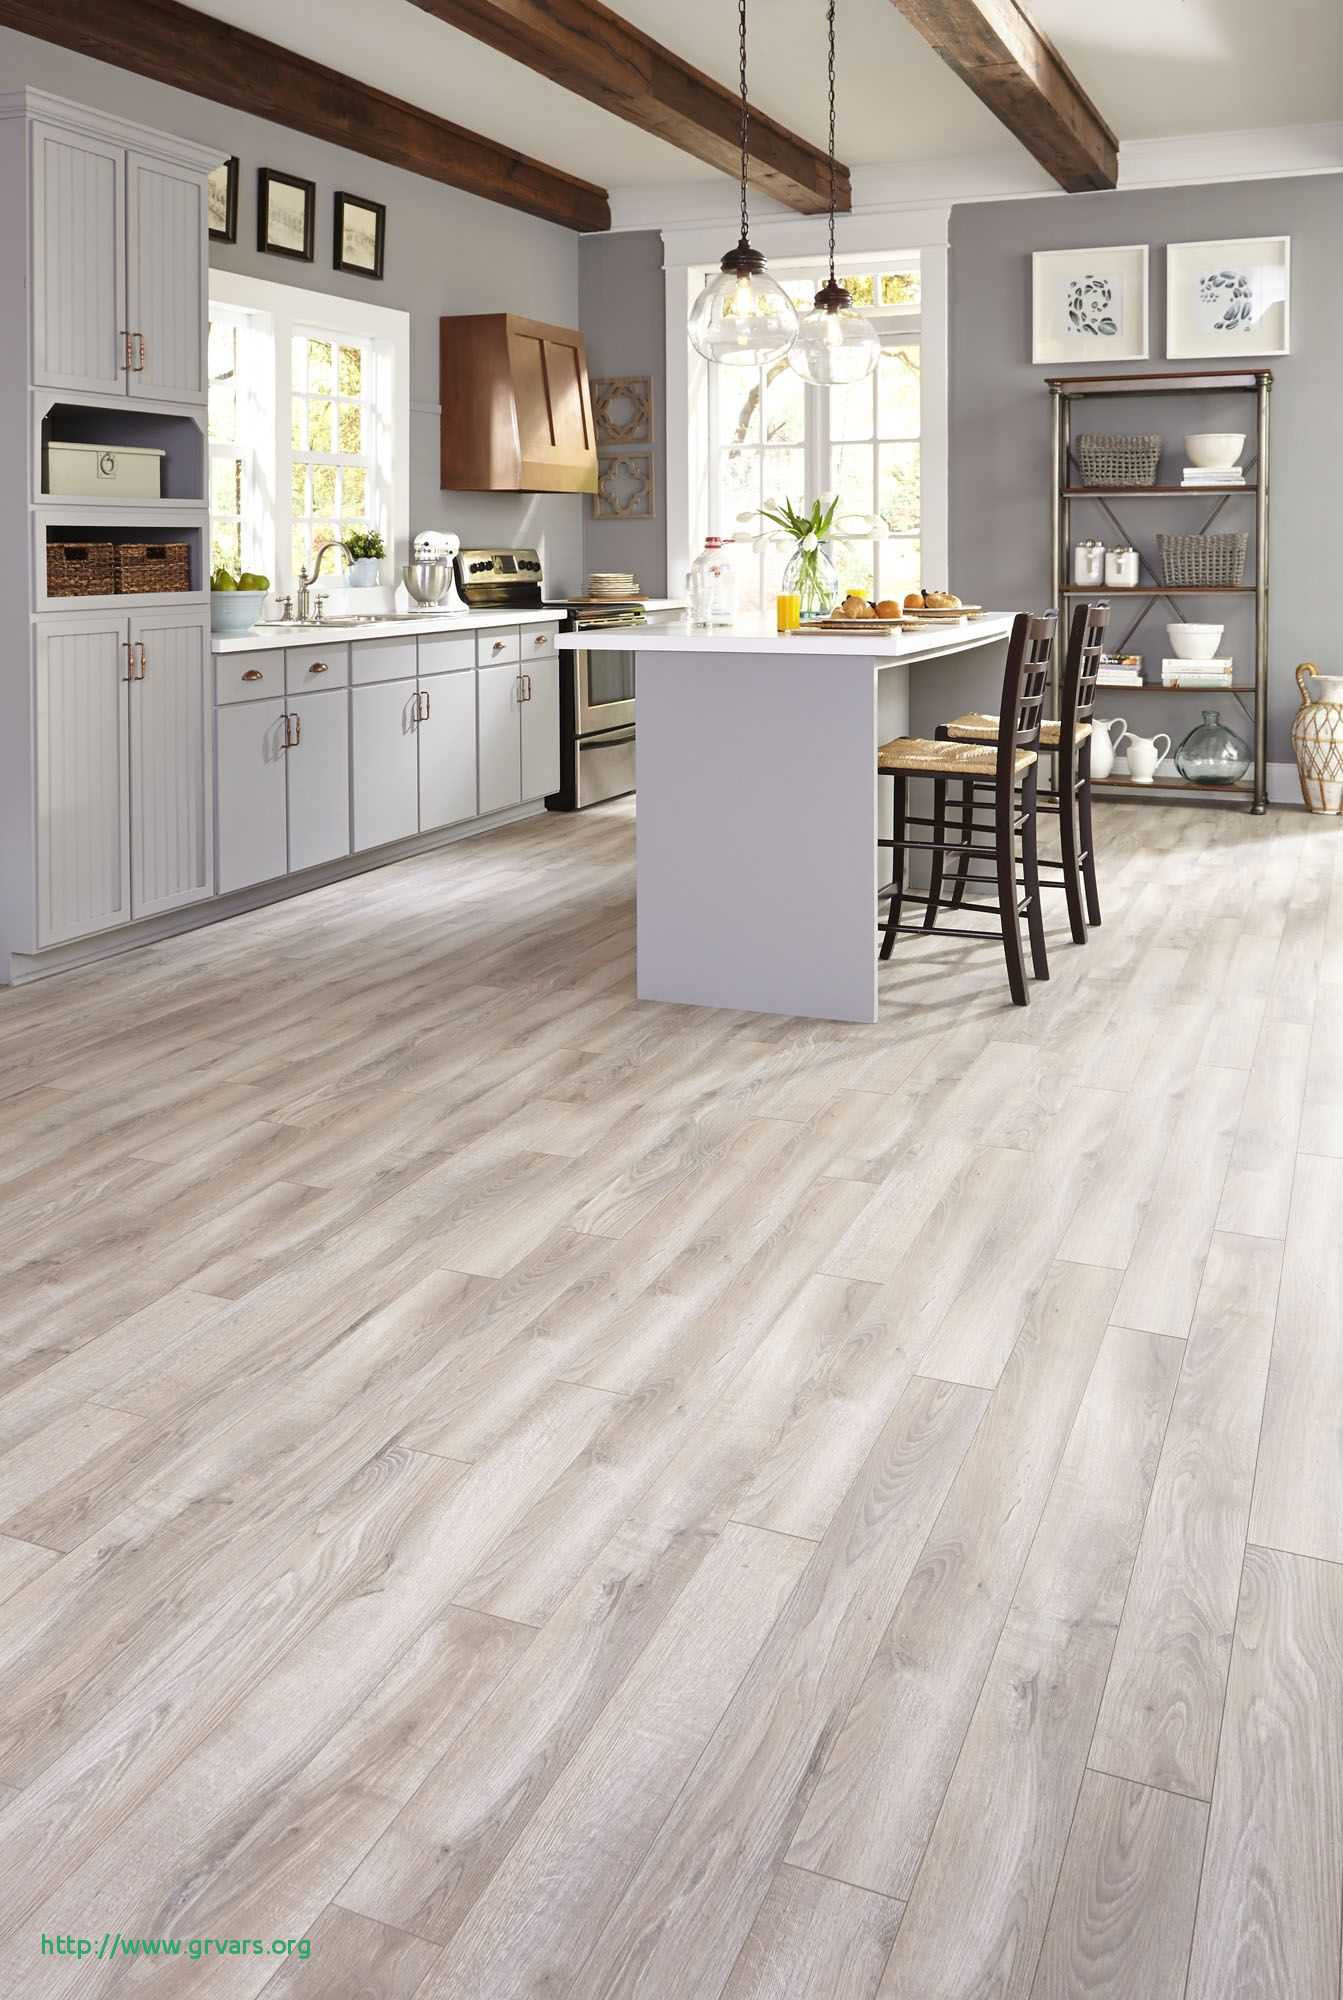 13 Spectacular Hardwood Flooring Fayetteville Nc 2024 free download hardwood flooring fayetteville nc of 21 ac289lagant flooring stores in st louis mo ideas blog throughout flooring stores in st louis mo luxe gray tones mixed with light creams and tans sugge